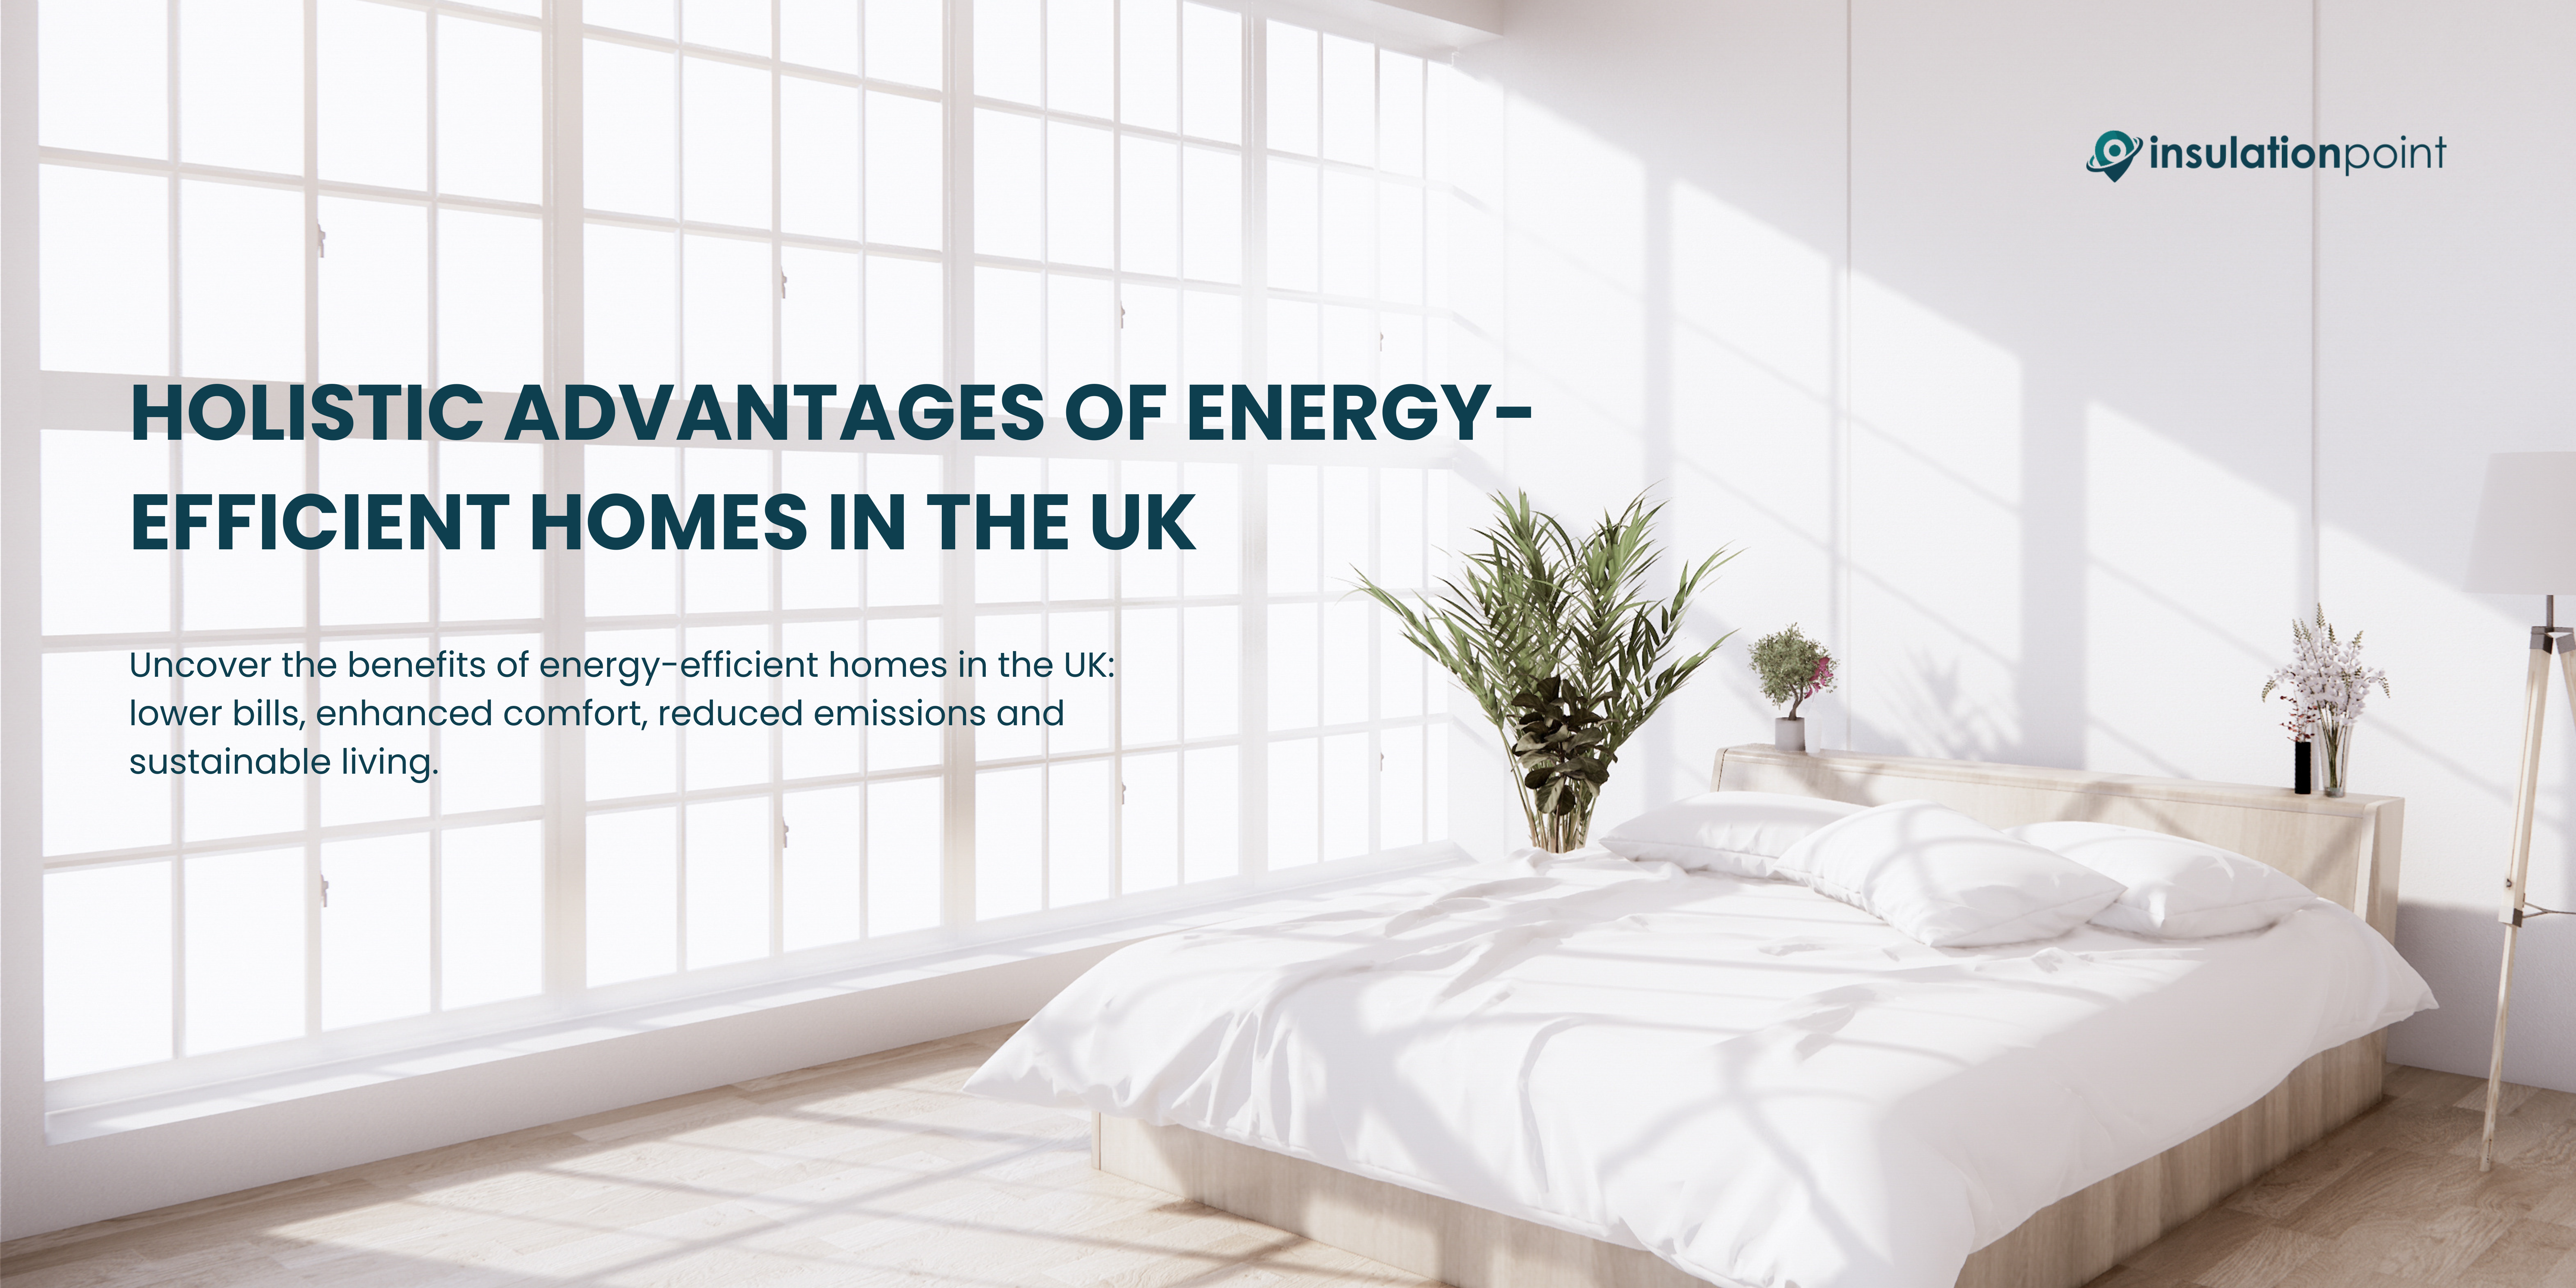 Holistic Advantages of Energy-Efficient Homes in the UK